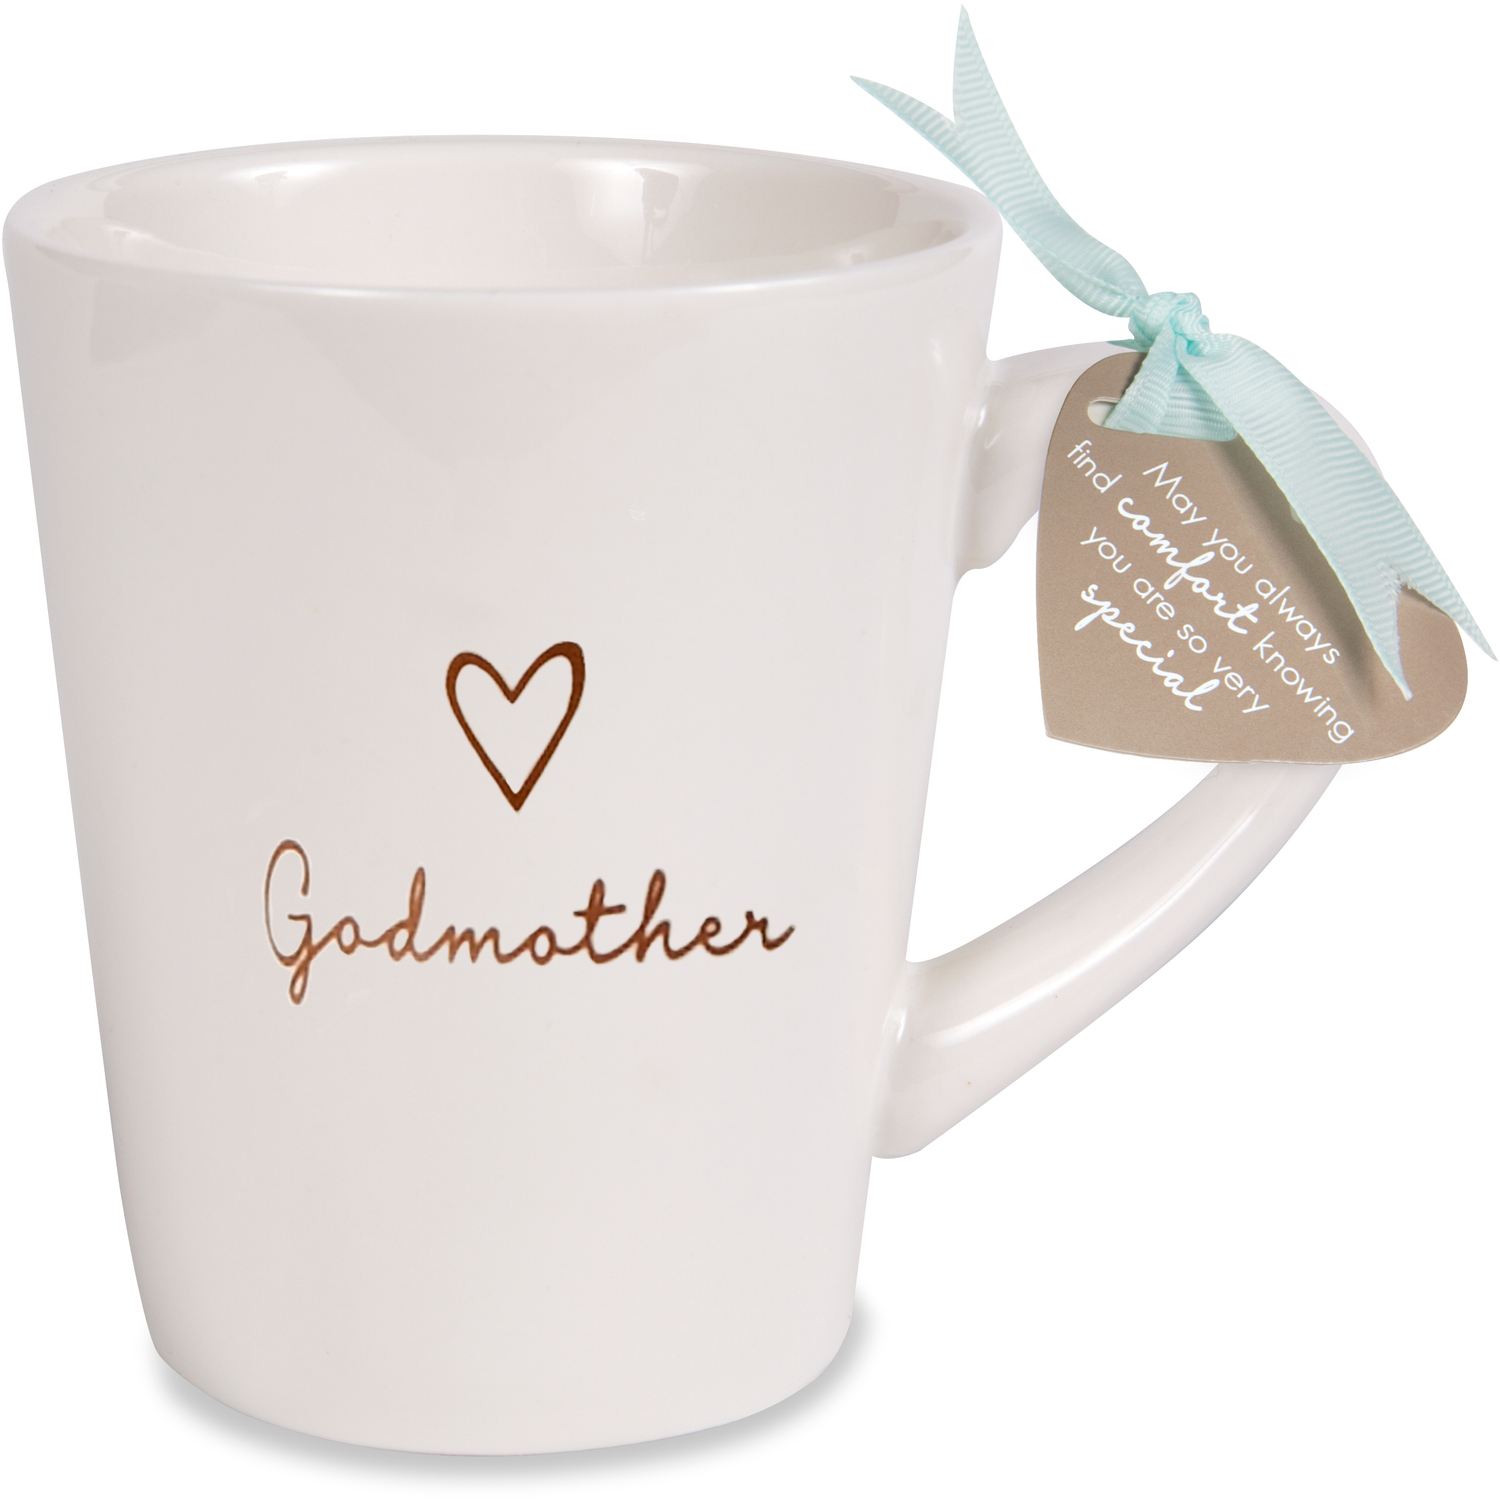 Godmother by Comfort Collection - Godmother - 15 oz Cup